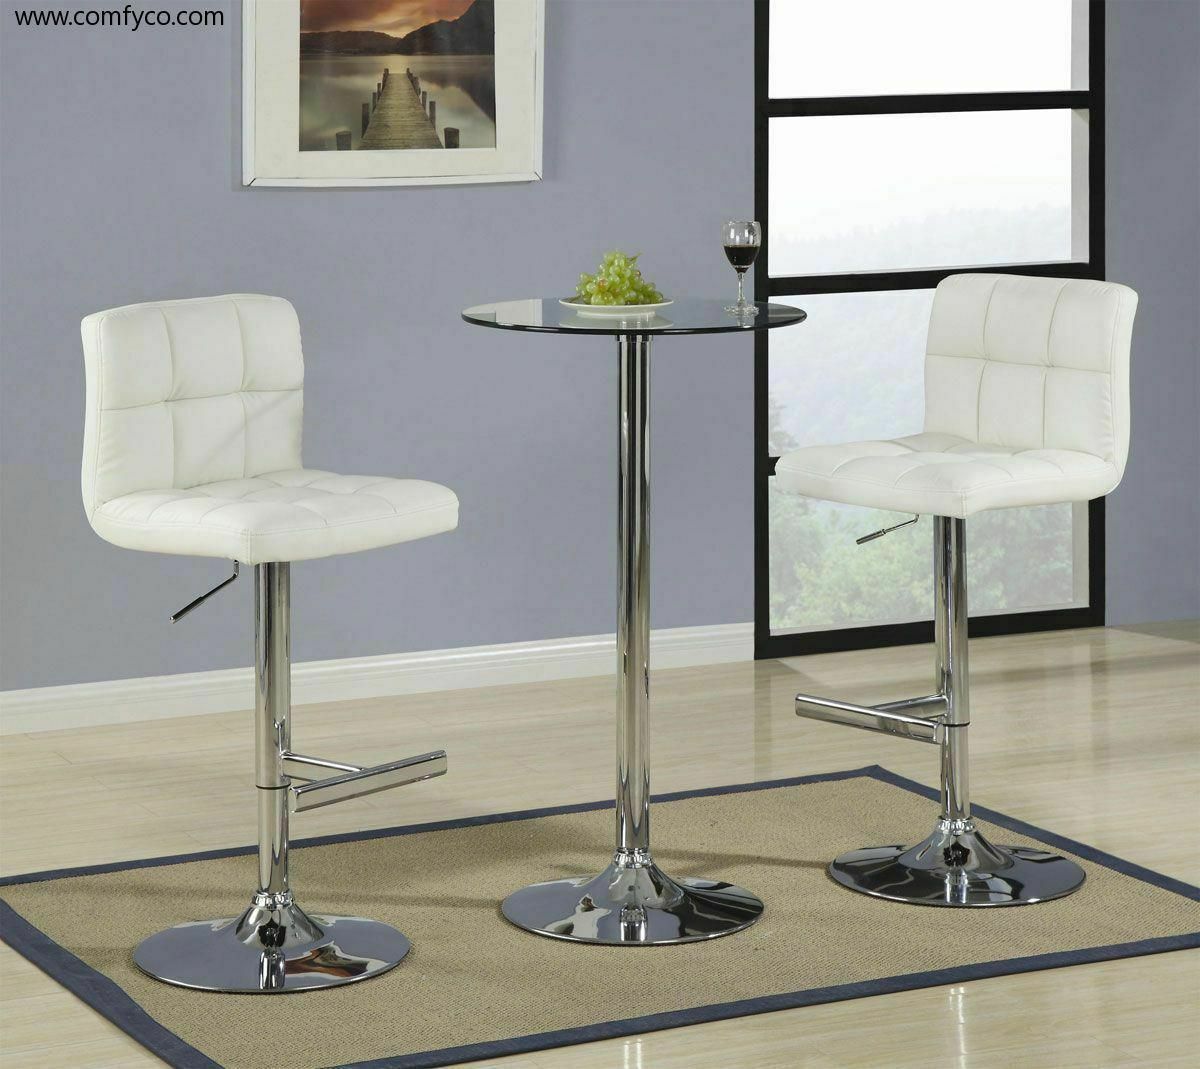 Adjustable Height Tufted Bar Stools With Footrest Chrome And White (Set Of 2)